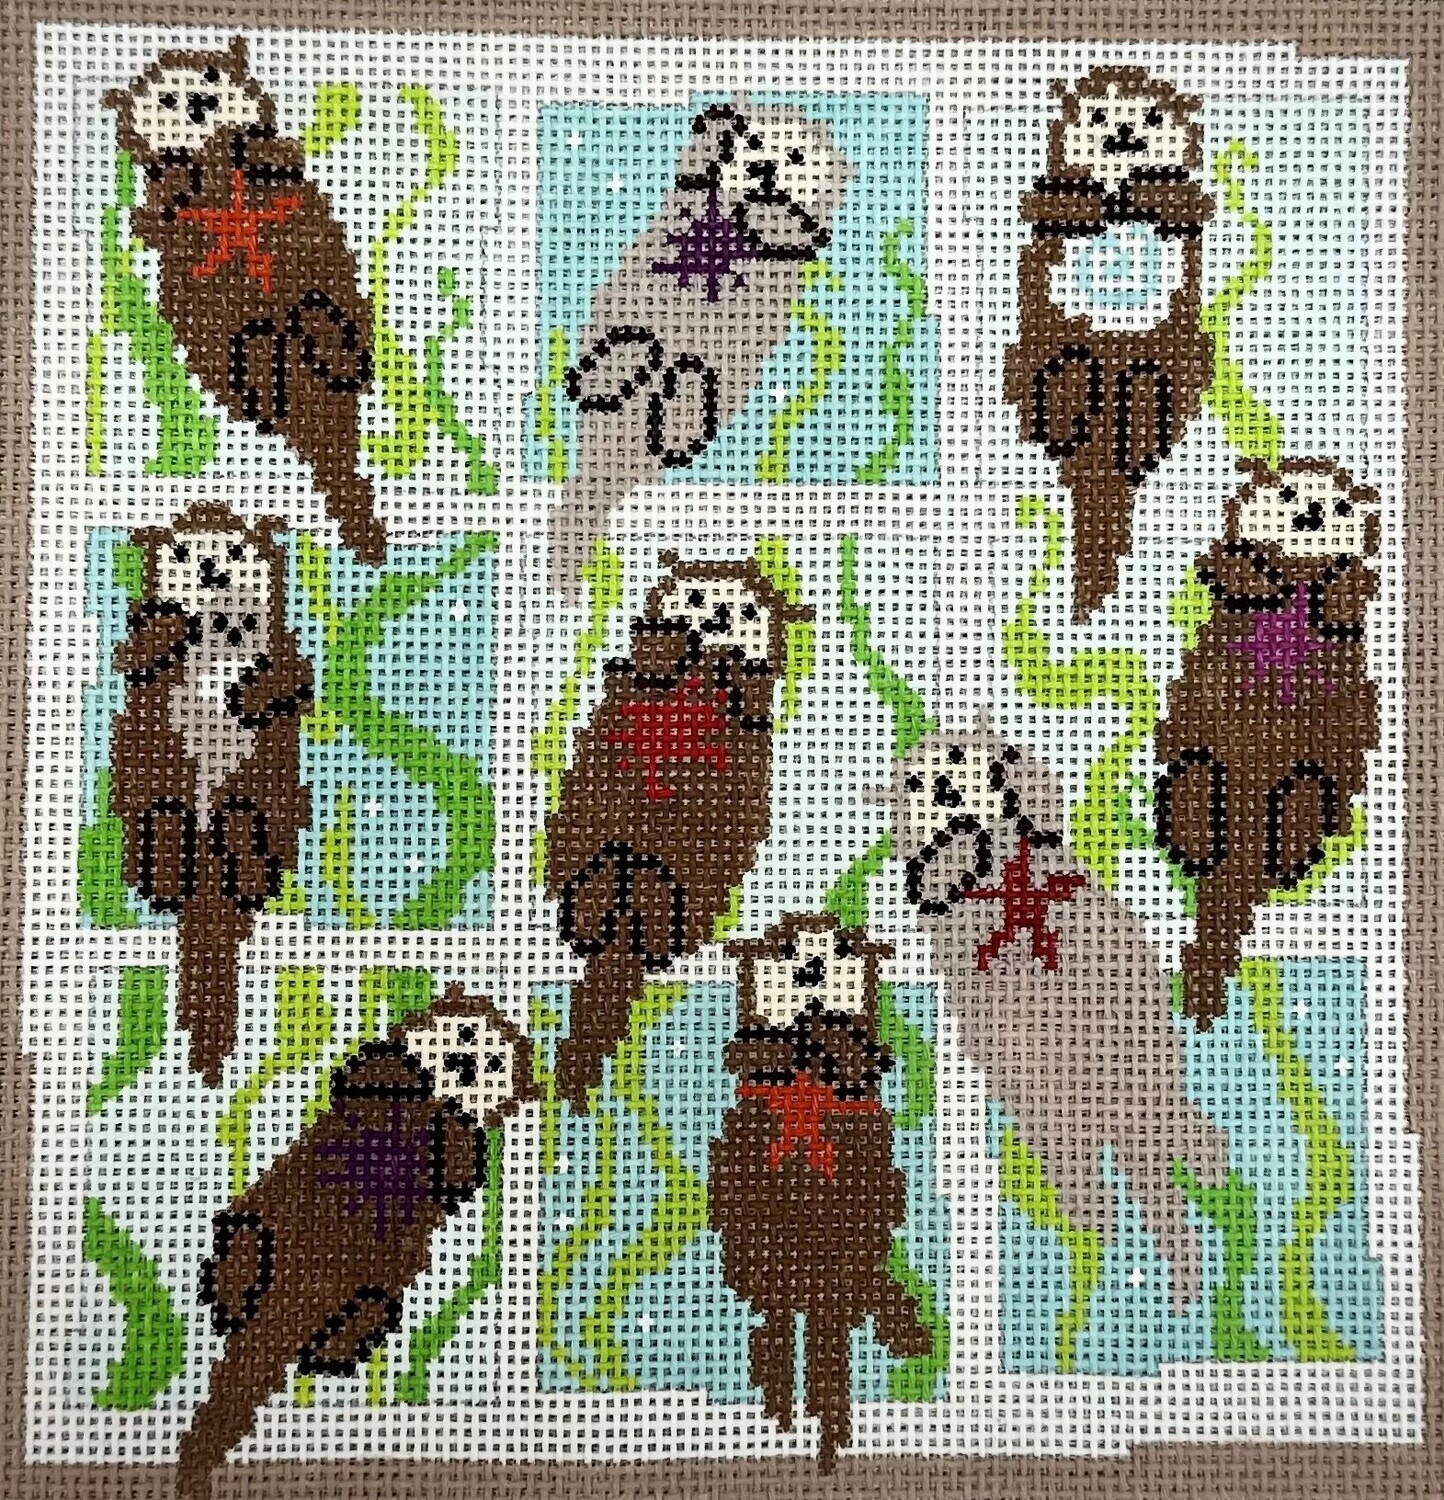 Otters (Handpainted by Pippen)